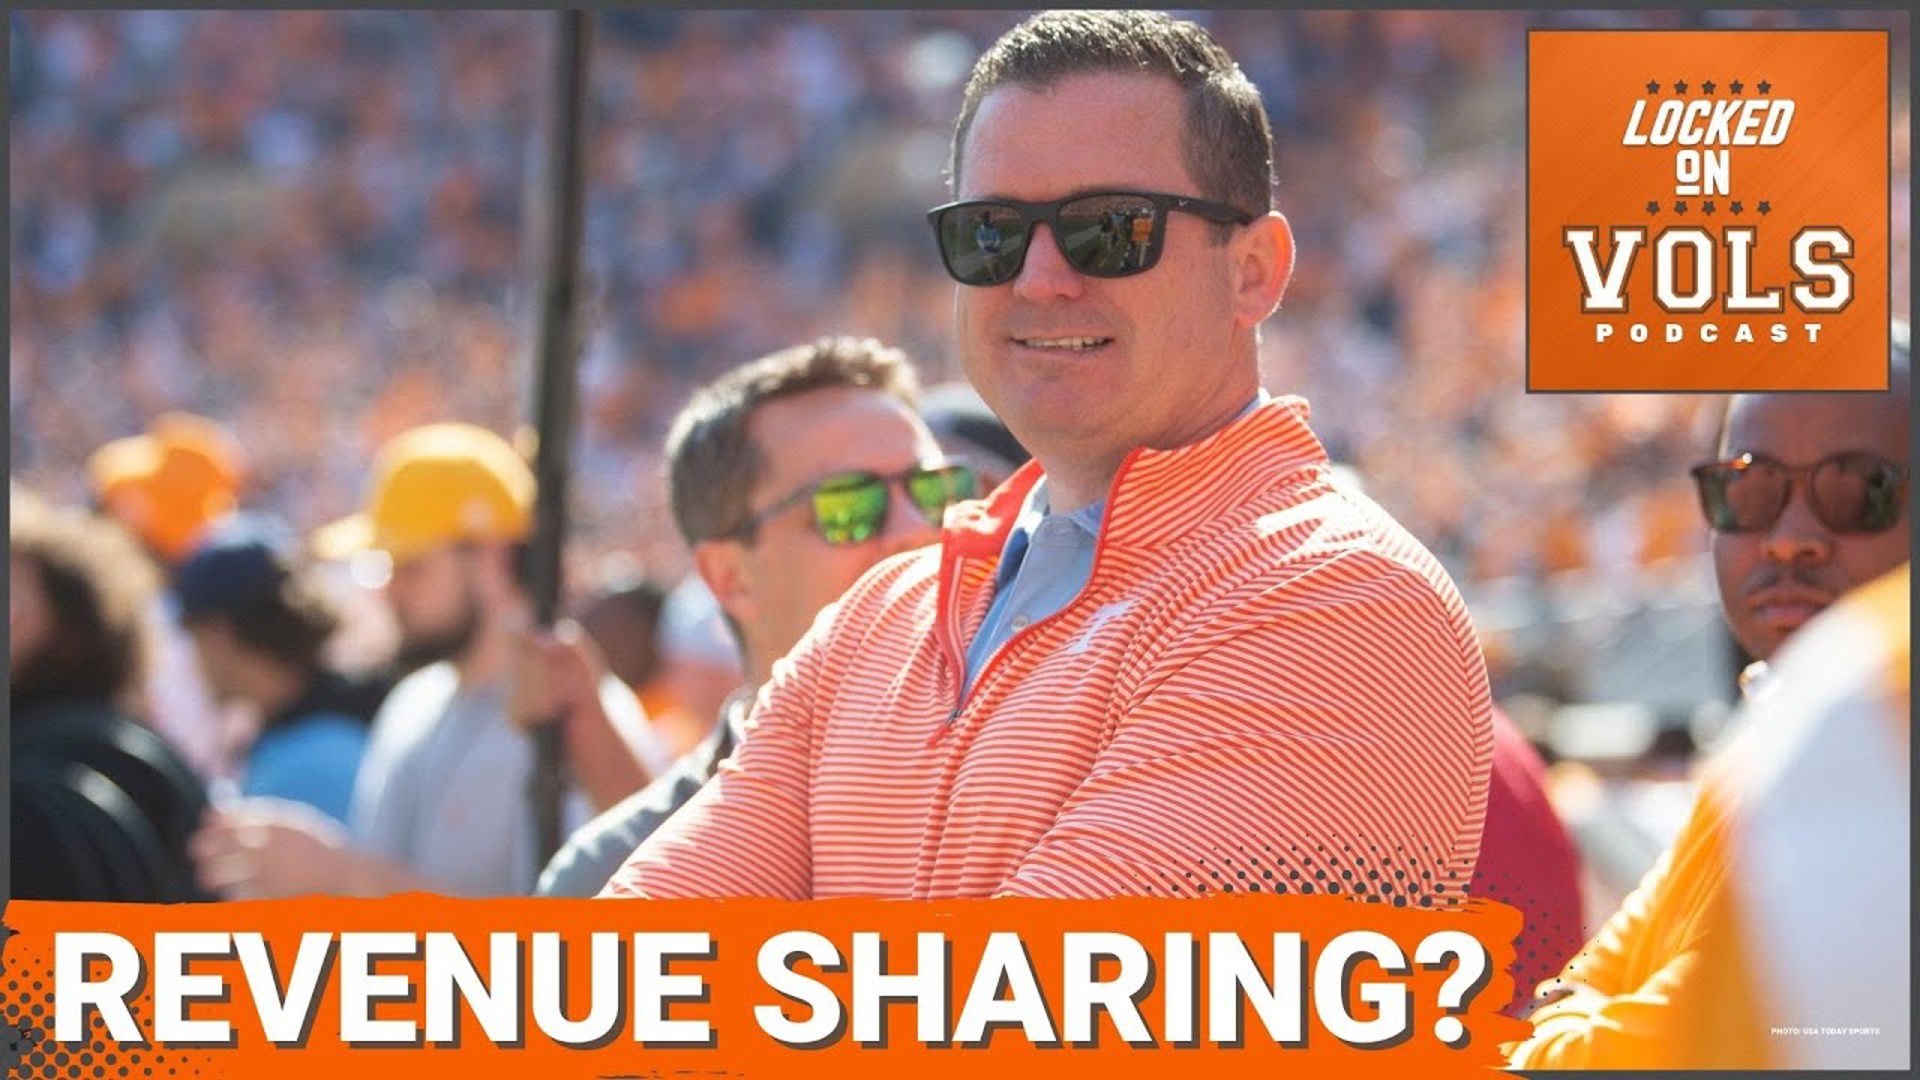 Tennessee AD Danny White challenges NCAA amid potential Revenue Sharing in College Athletics